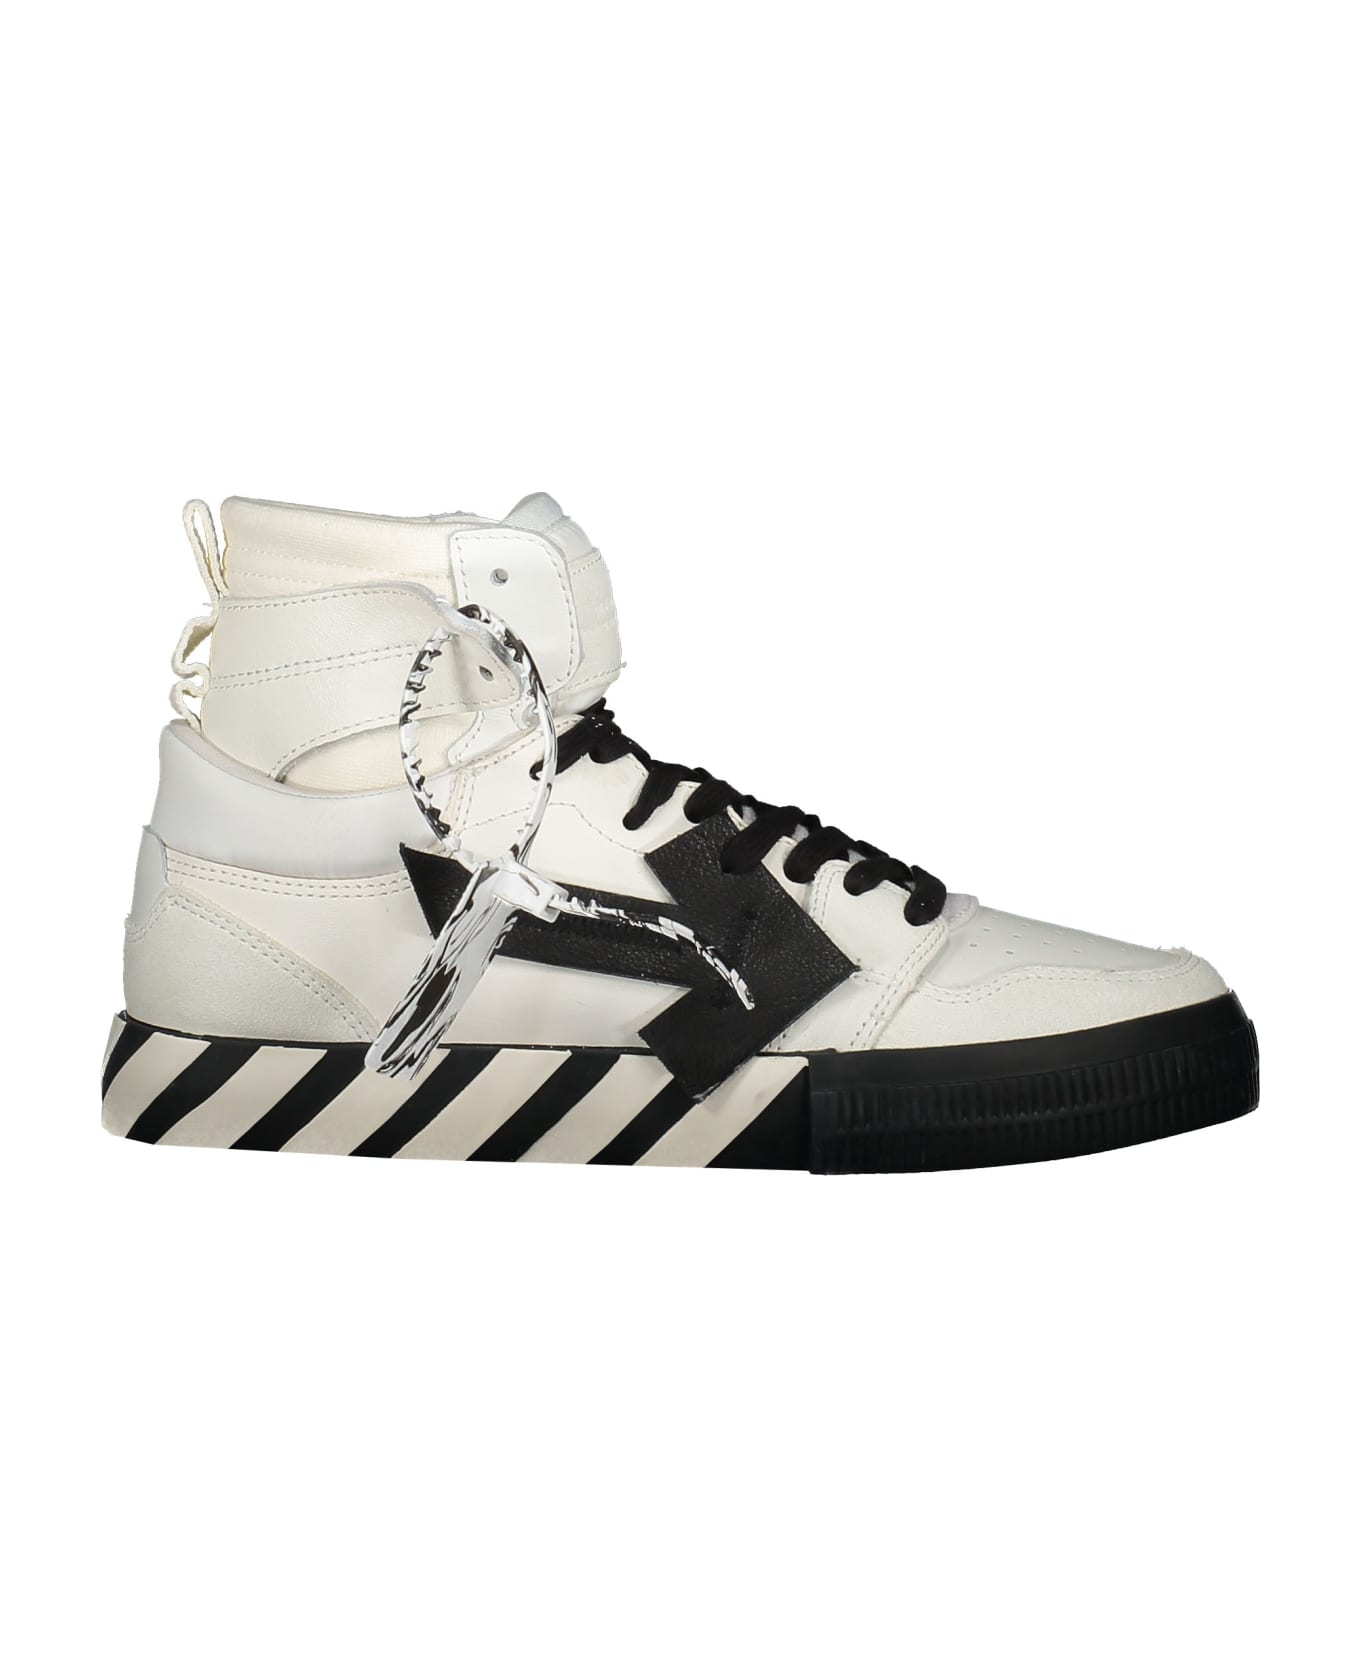 Off-White Vulcanized High-top Sneakers | italist